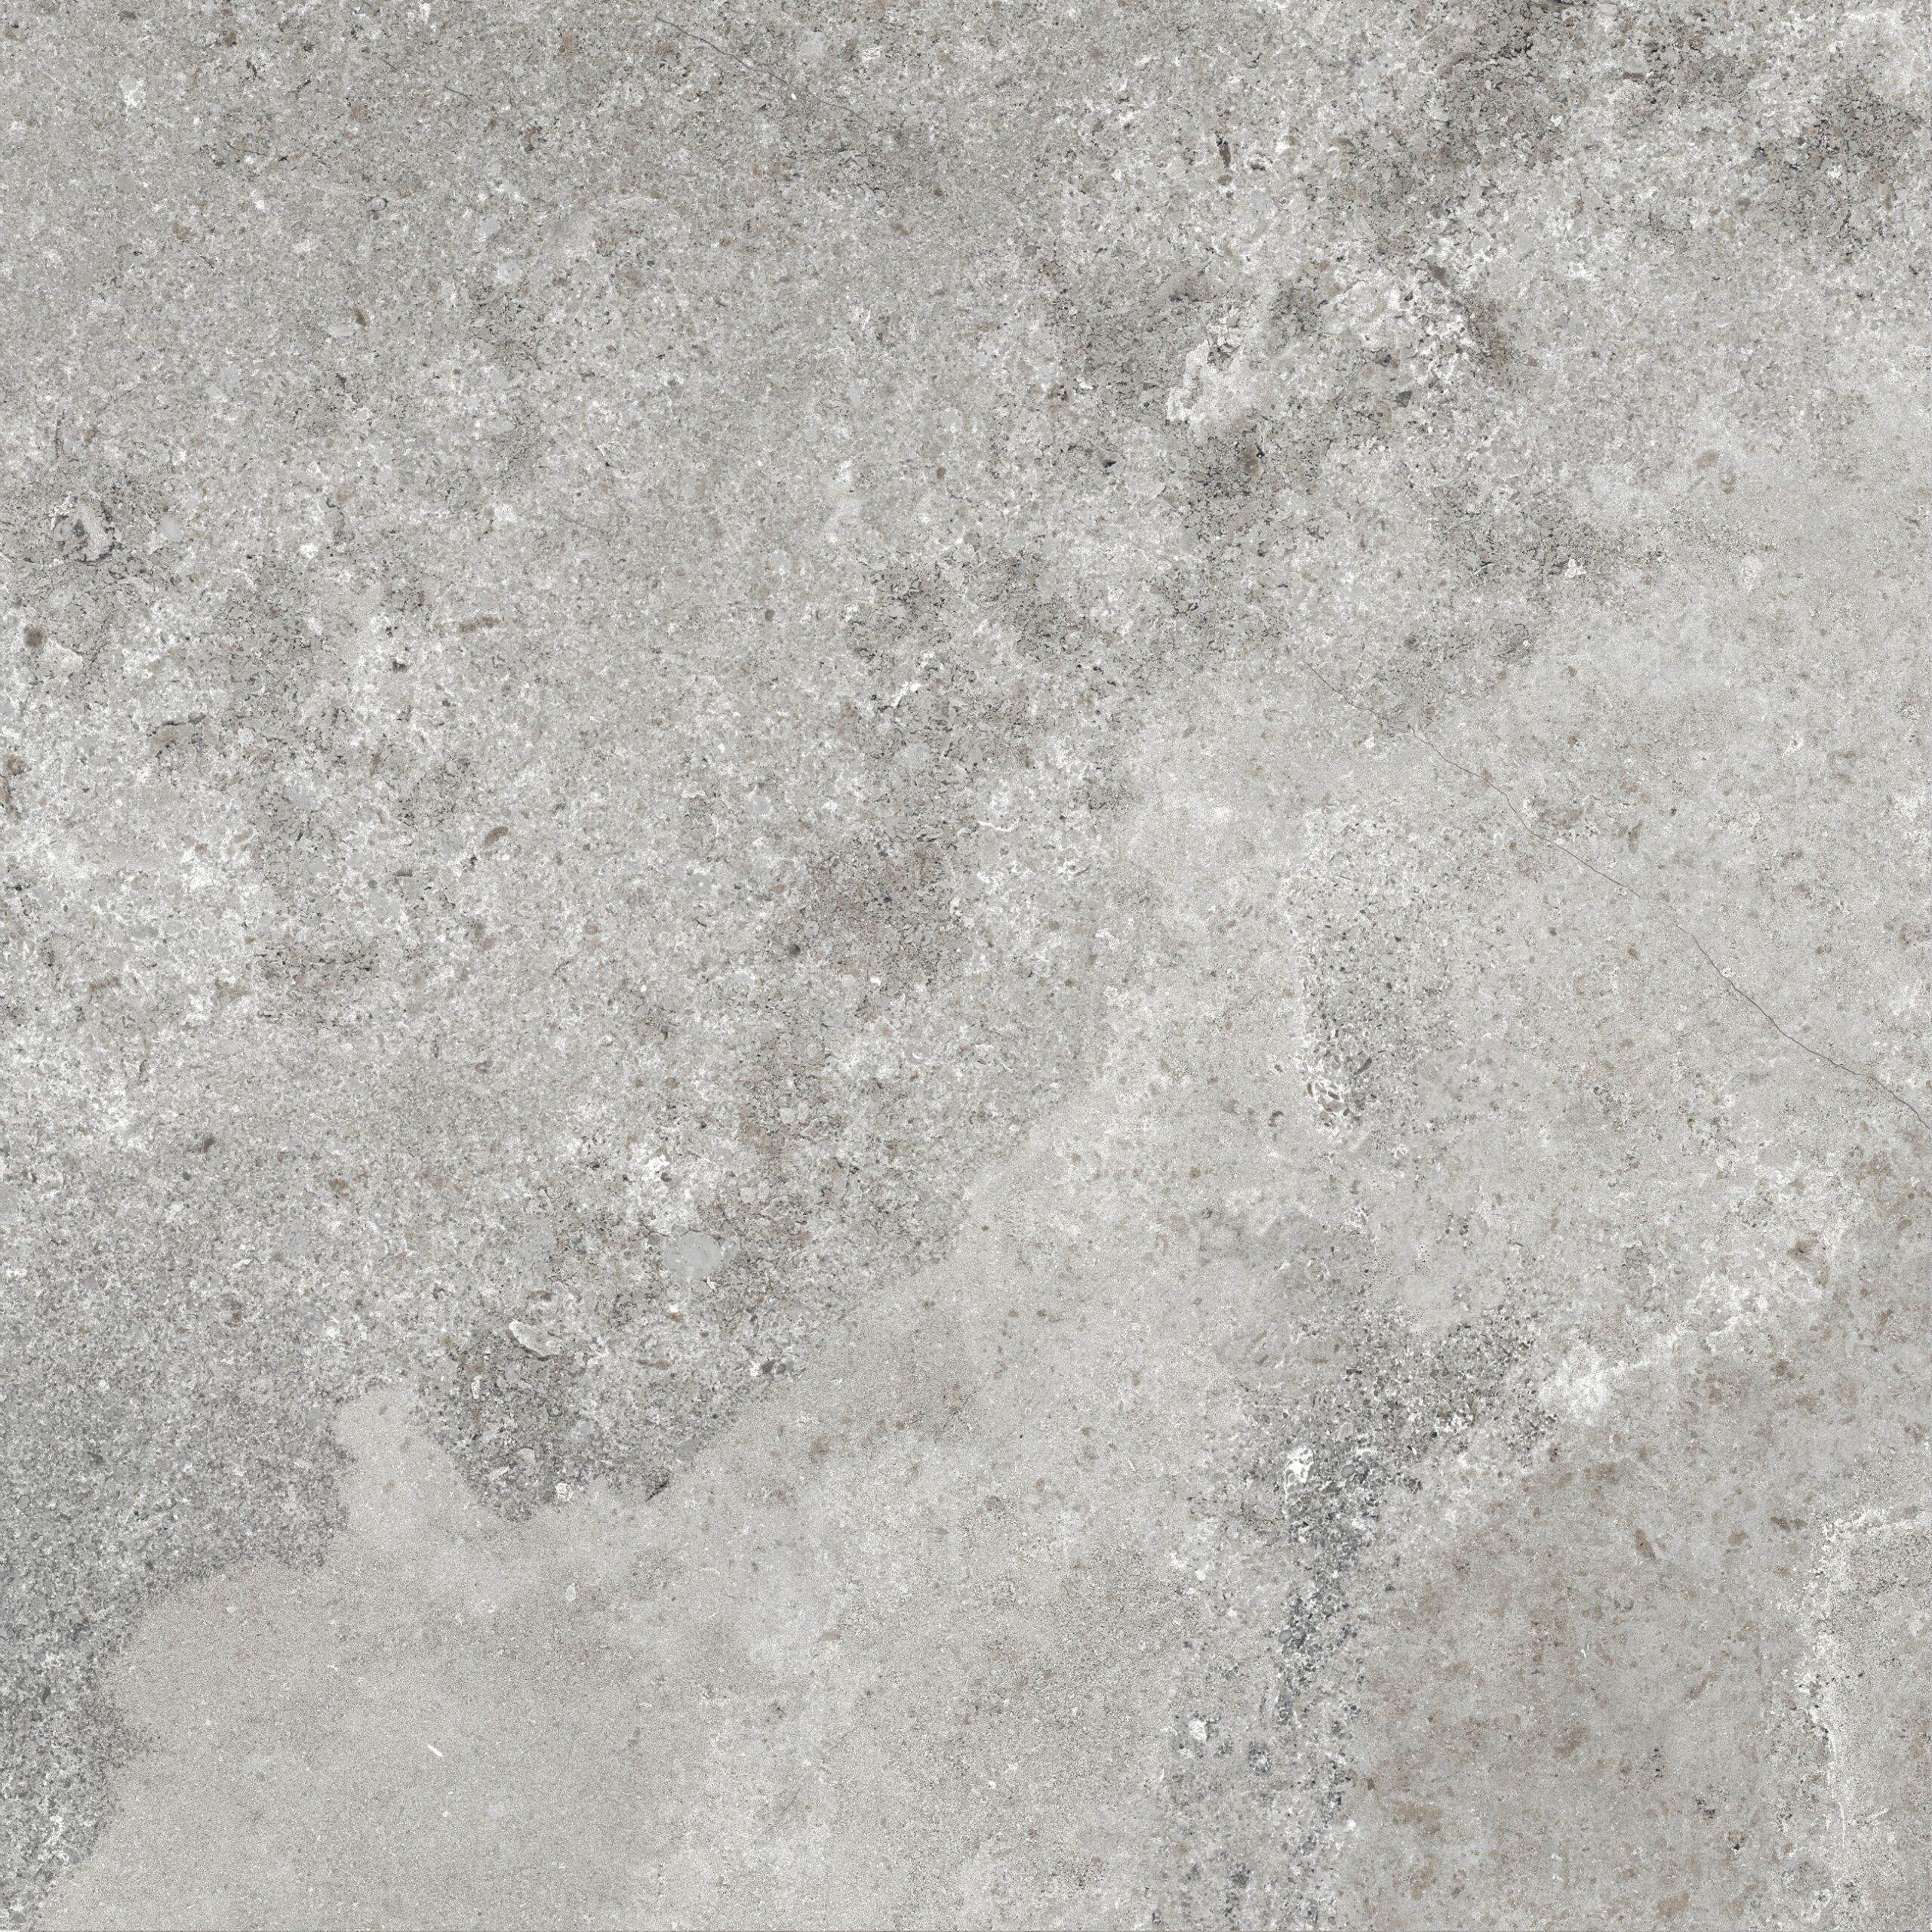 Architectural opulence: stone-look porcelain defines upscale interiors.